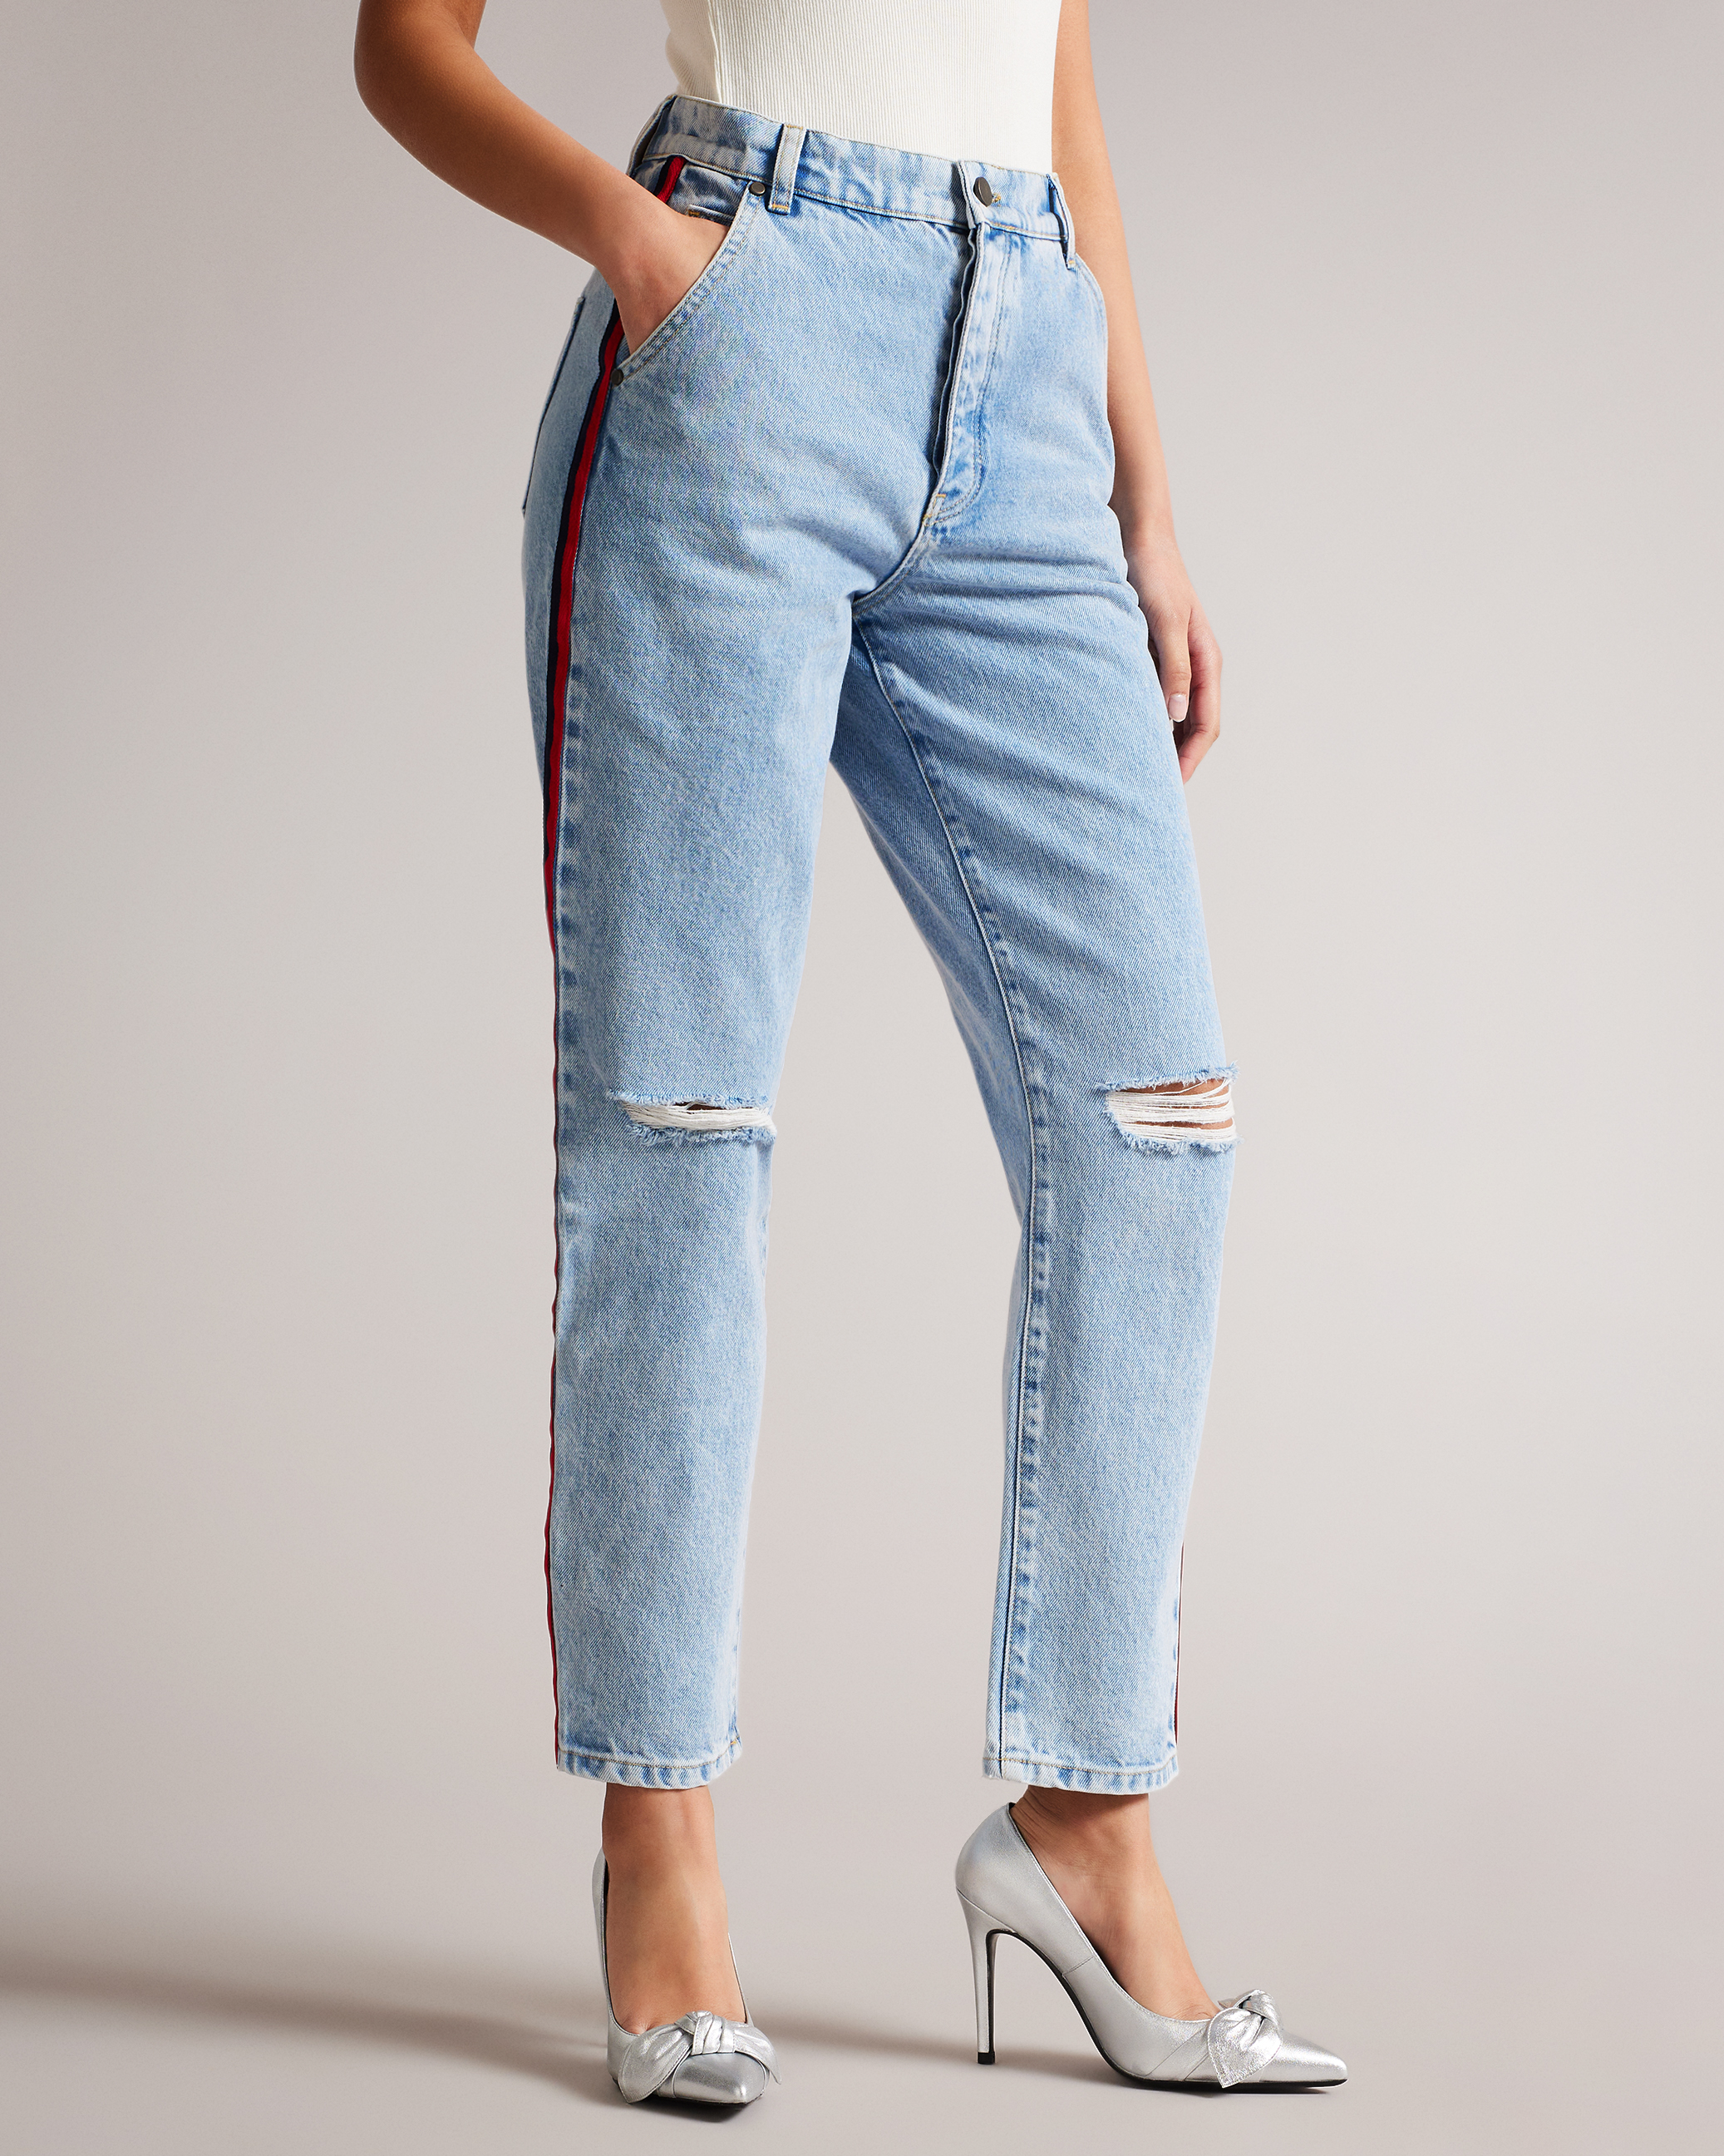 Ted Baker Jeans LAST ONE!!! PRALINA turn up denim jeans 